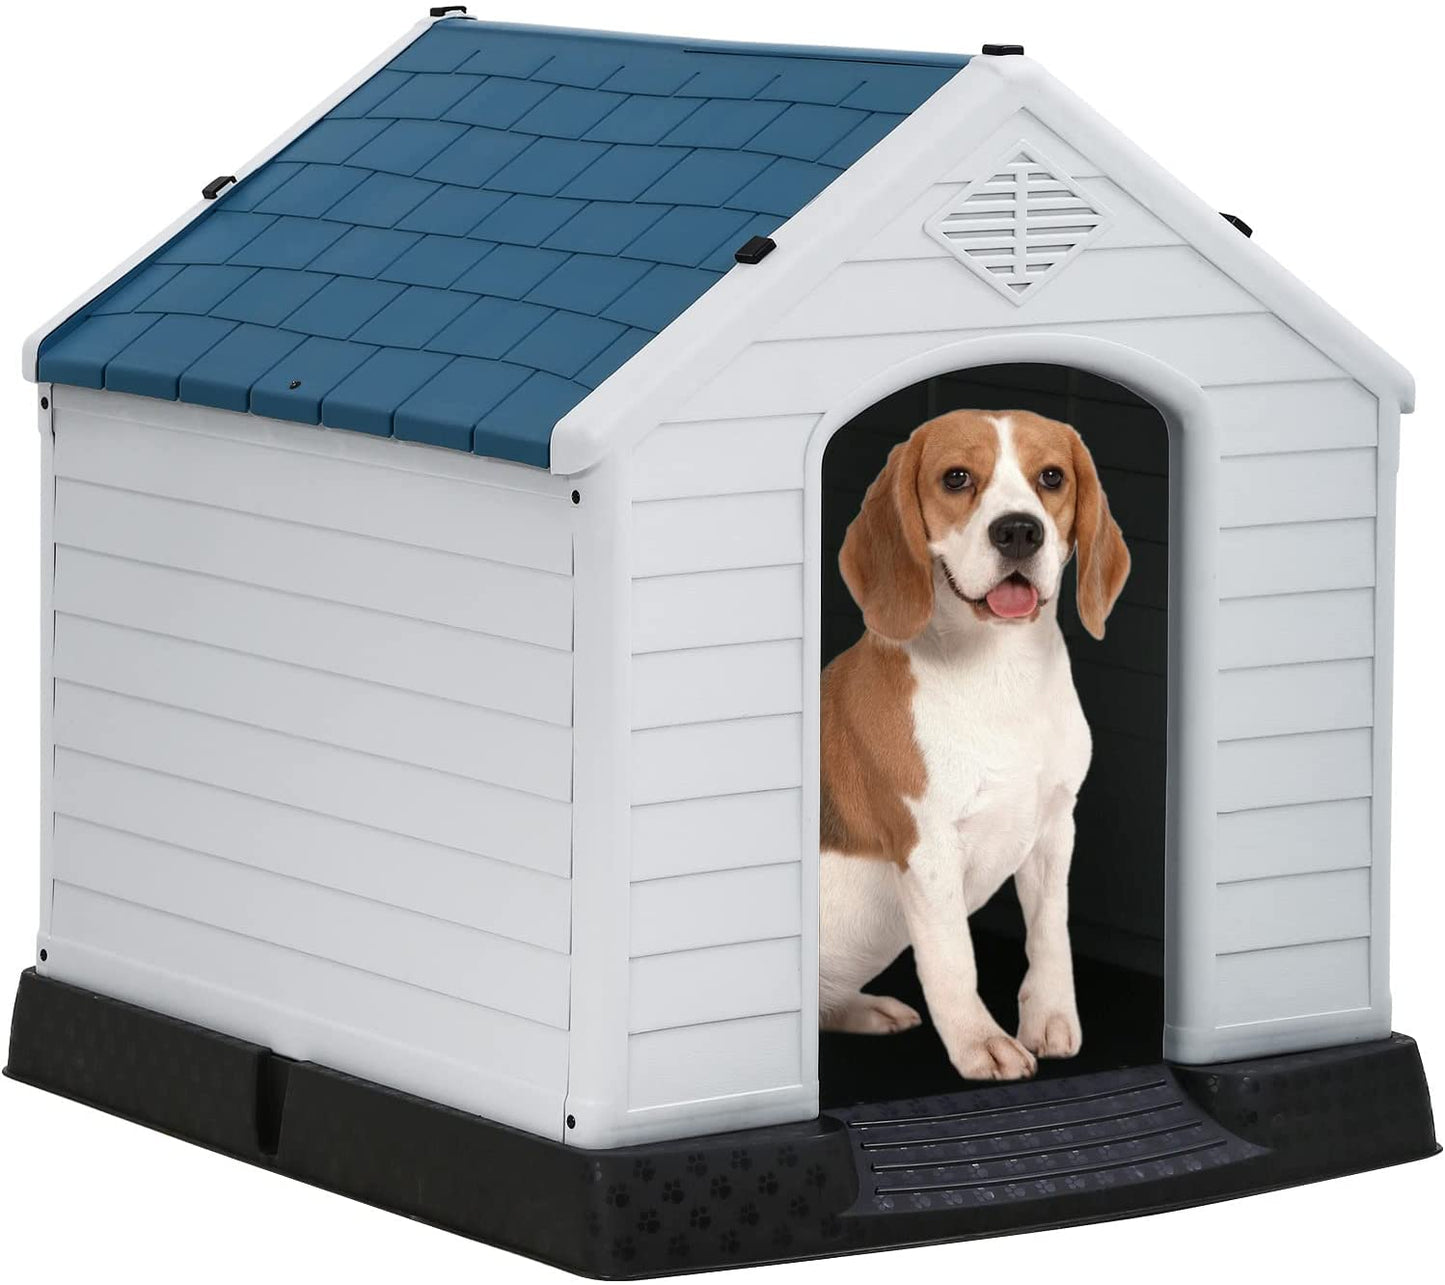 Bestpet Dog House Pet Kennel with Air Vents, Indoor & Outdoor